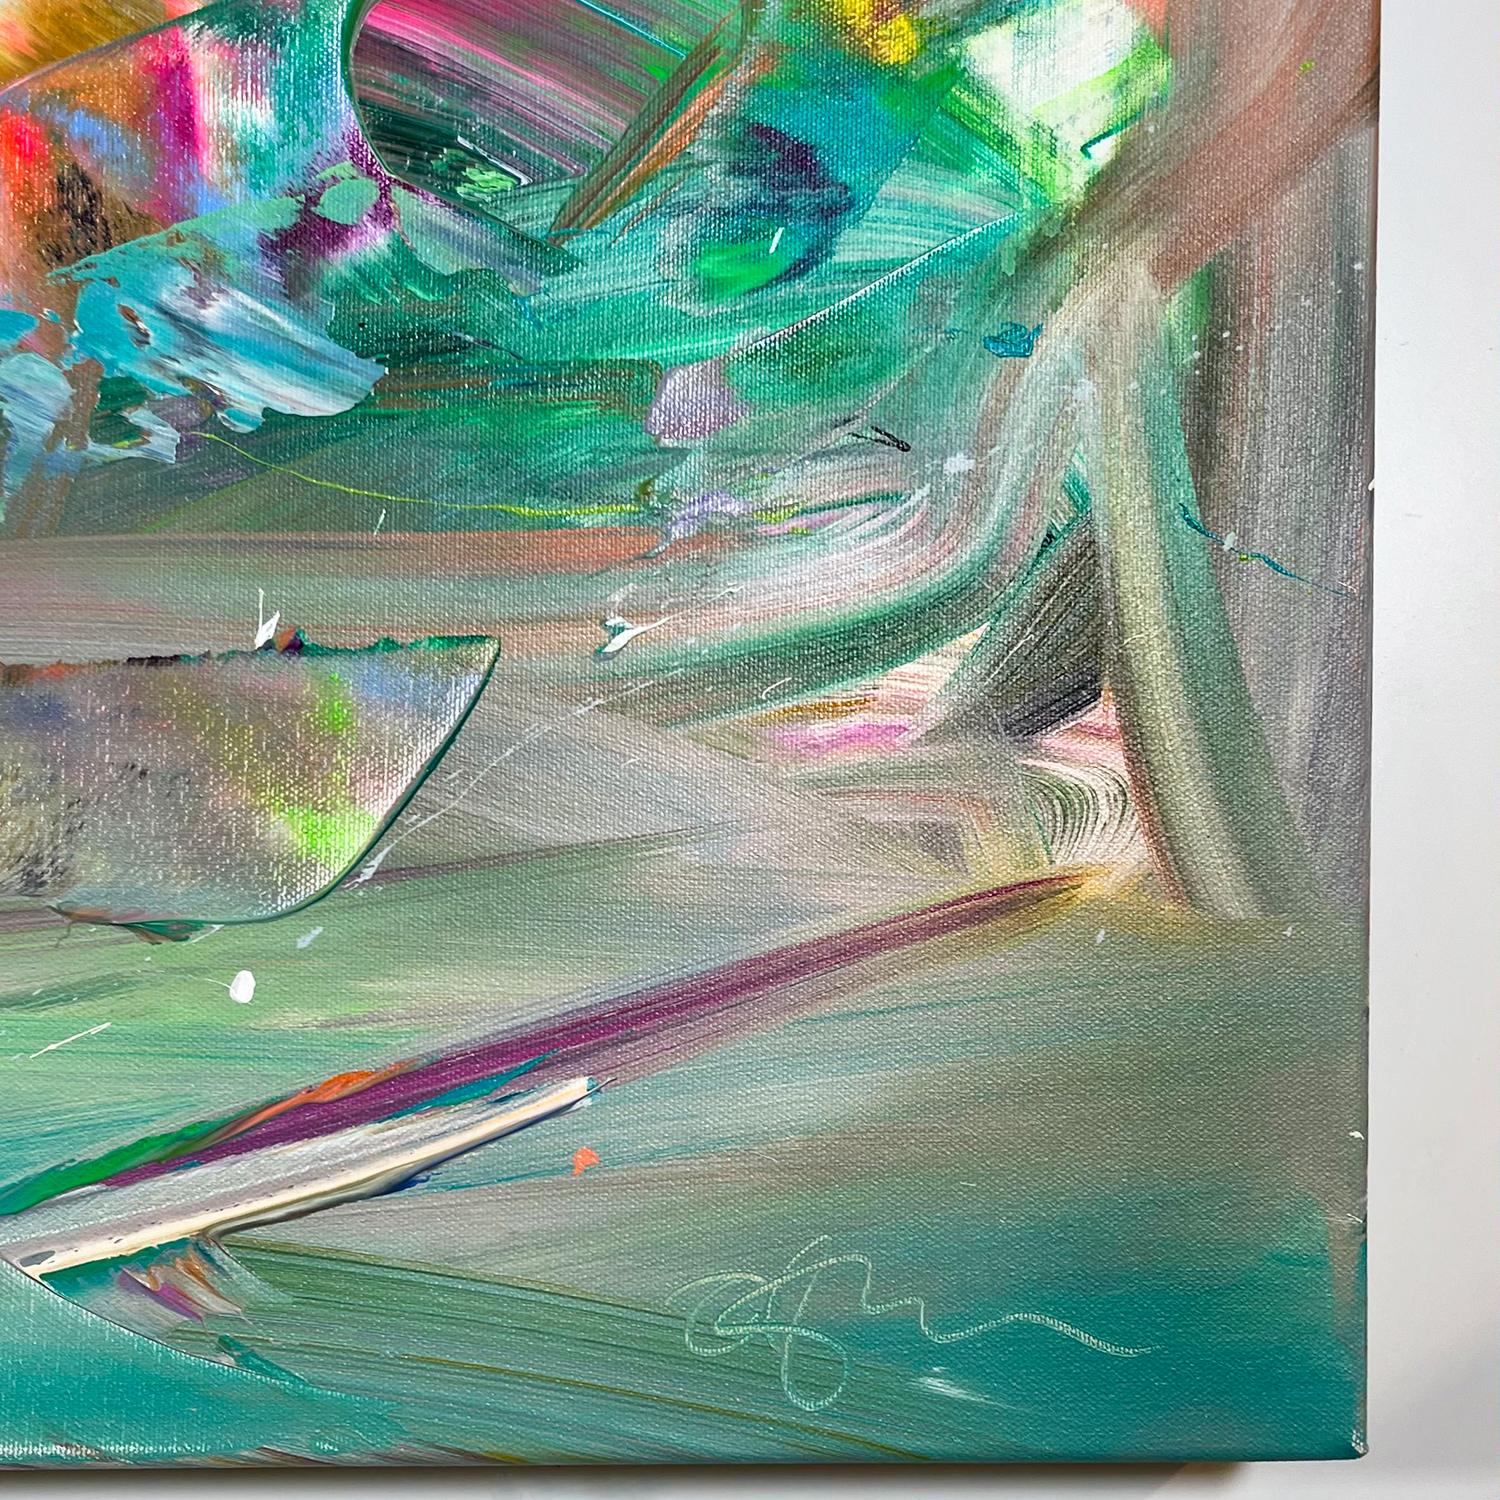 Joel Masewich’s multi-layered, imaginary abstract works represent his emotional response to landscapes with many of his pieces containing visual references to water or light. The vivid hues are sharply contrasting, as if lit by direct sunlight and